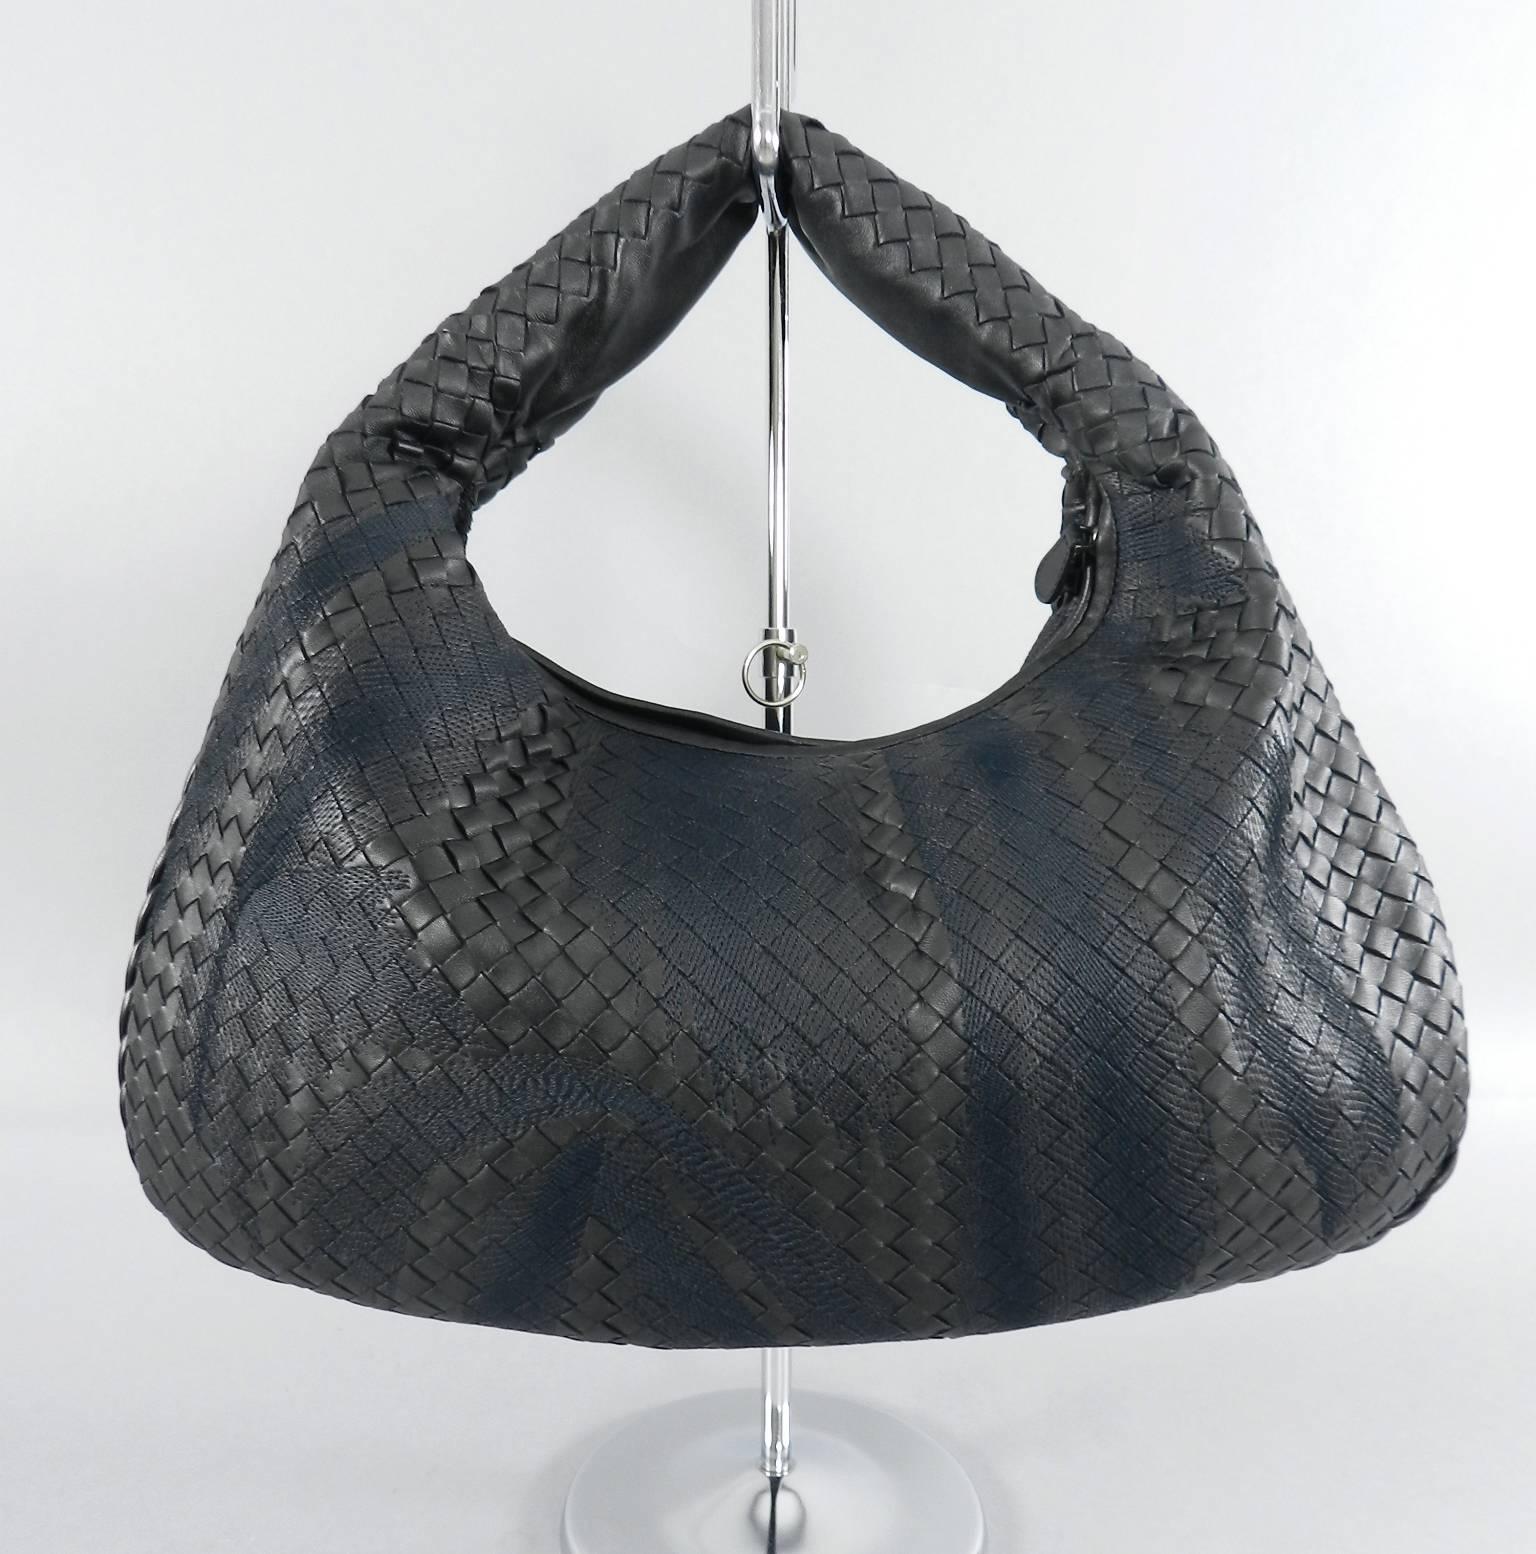 Bottega Veneta Black Intrecciato Leather Shadow Embroidered Nappa Hobo Bag.  Original retail $3800. Condition is as new - received as a gift and carried once if at all. Includes duster. Body of bag measures about 19.5 x 11 x 3 with a 7